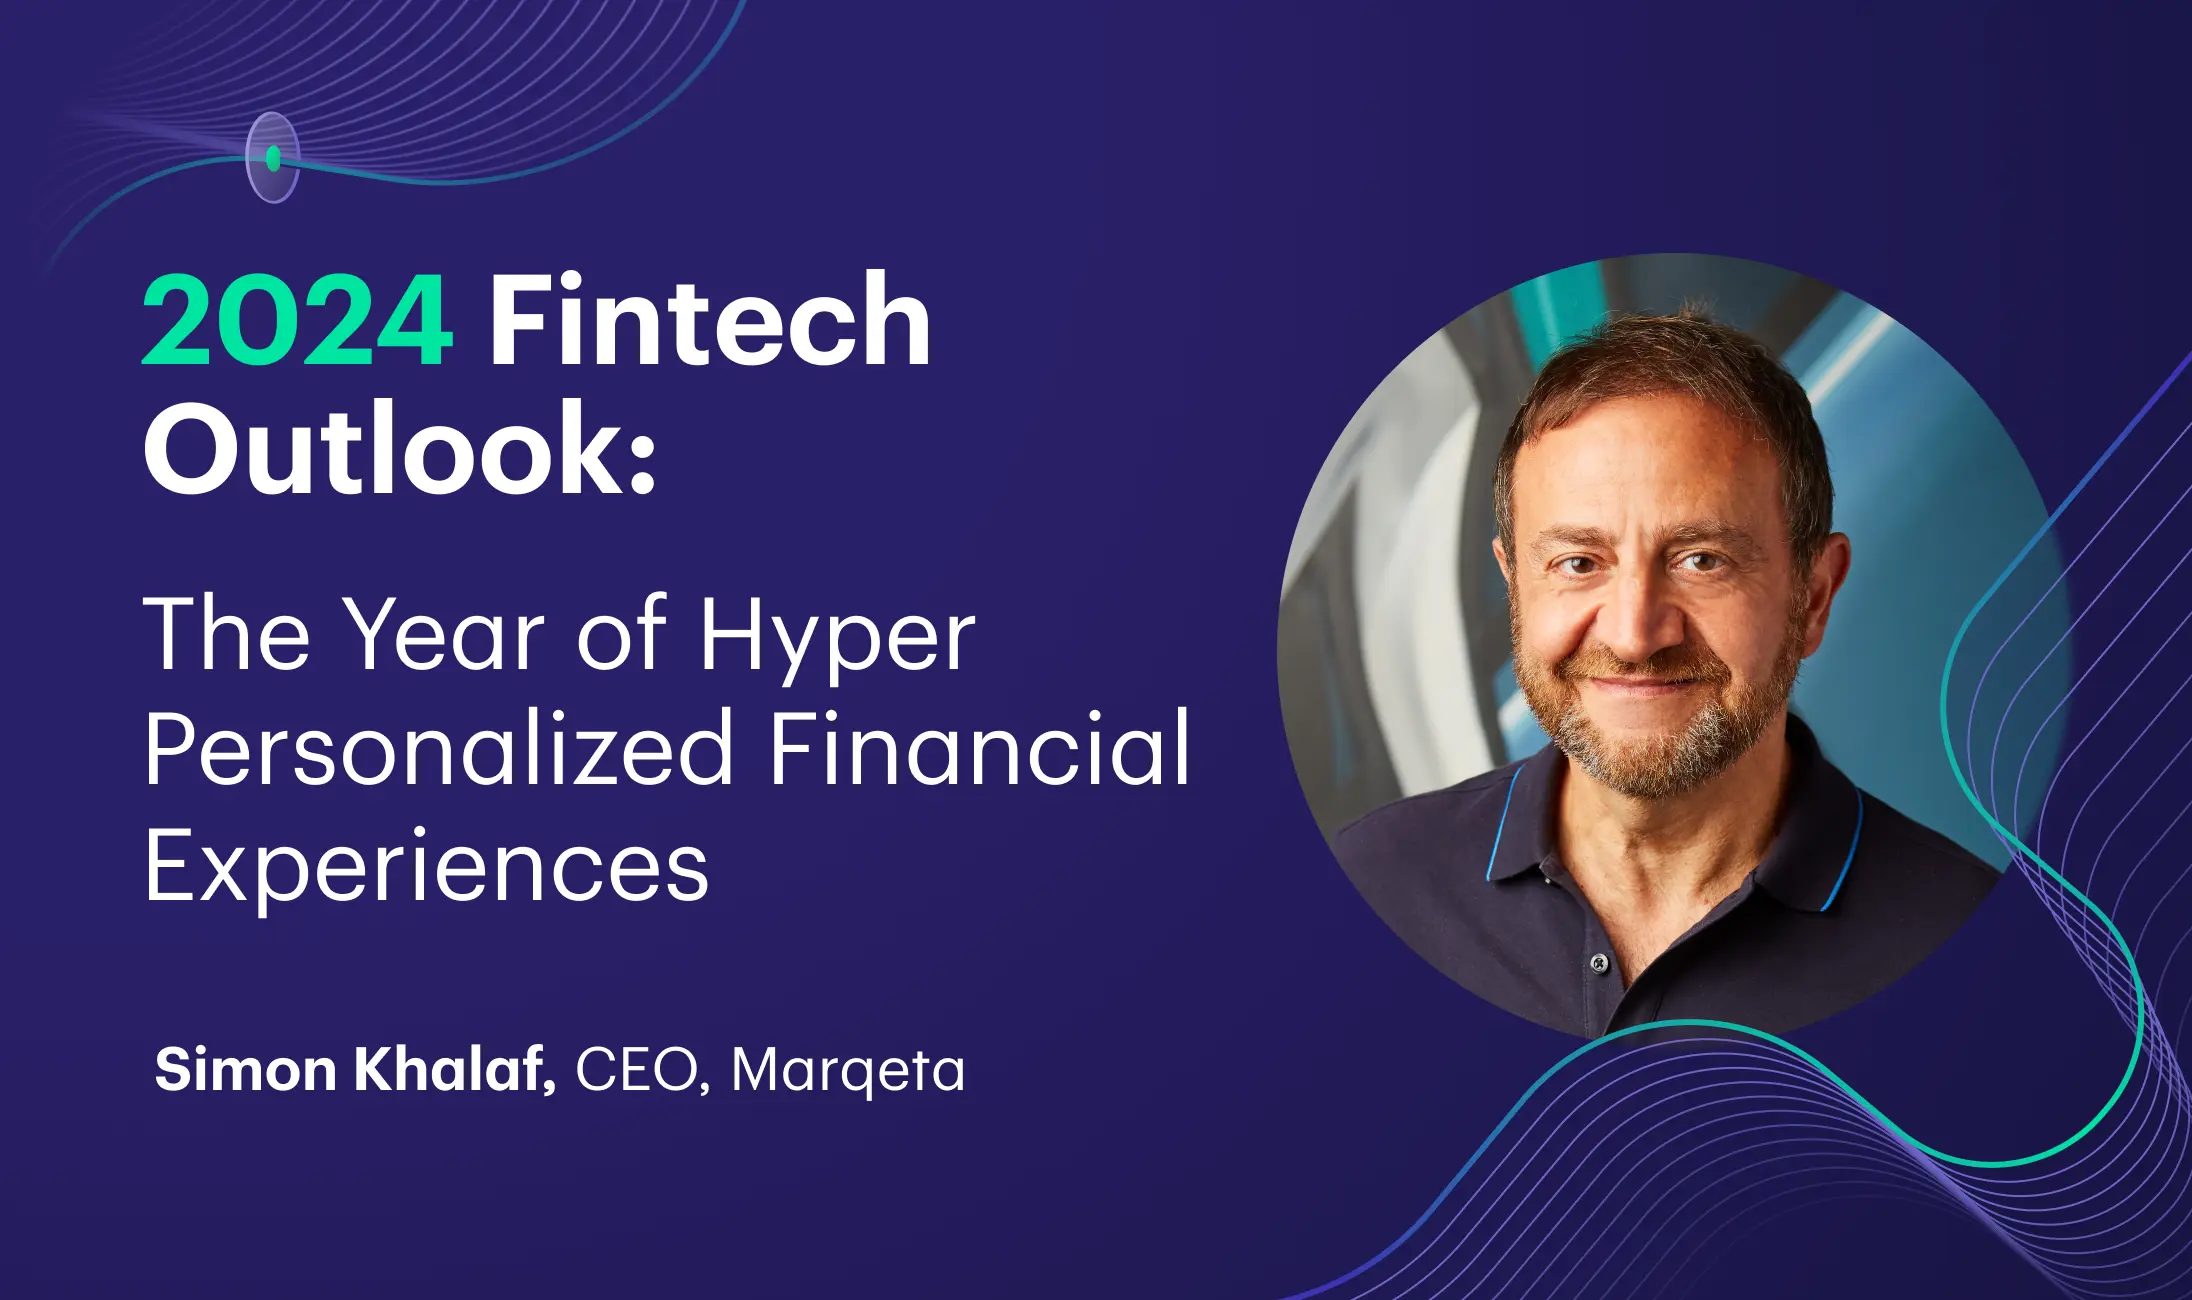 2024 Fintech Outlook: The Year of Hyper Personalized Financial Experiences Simon